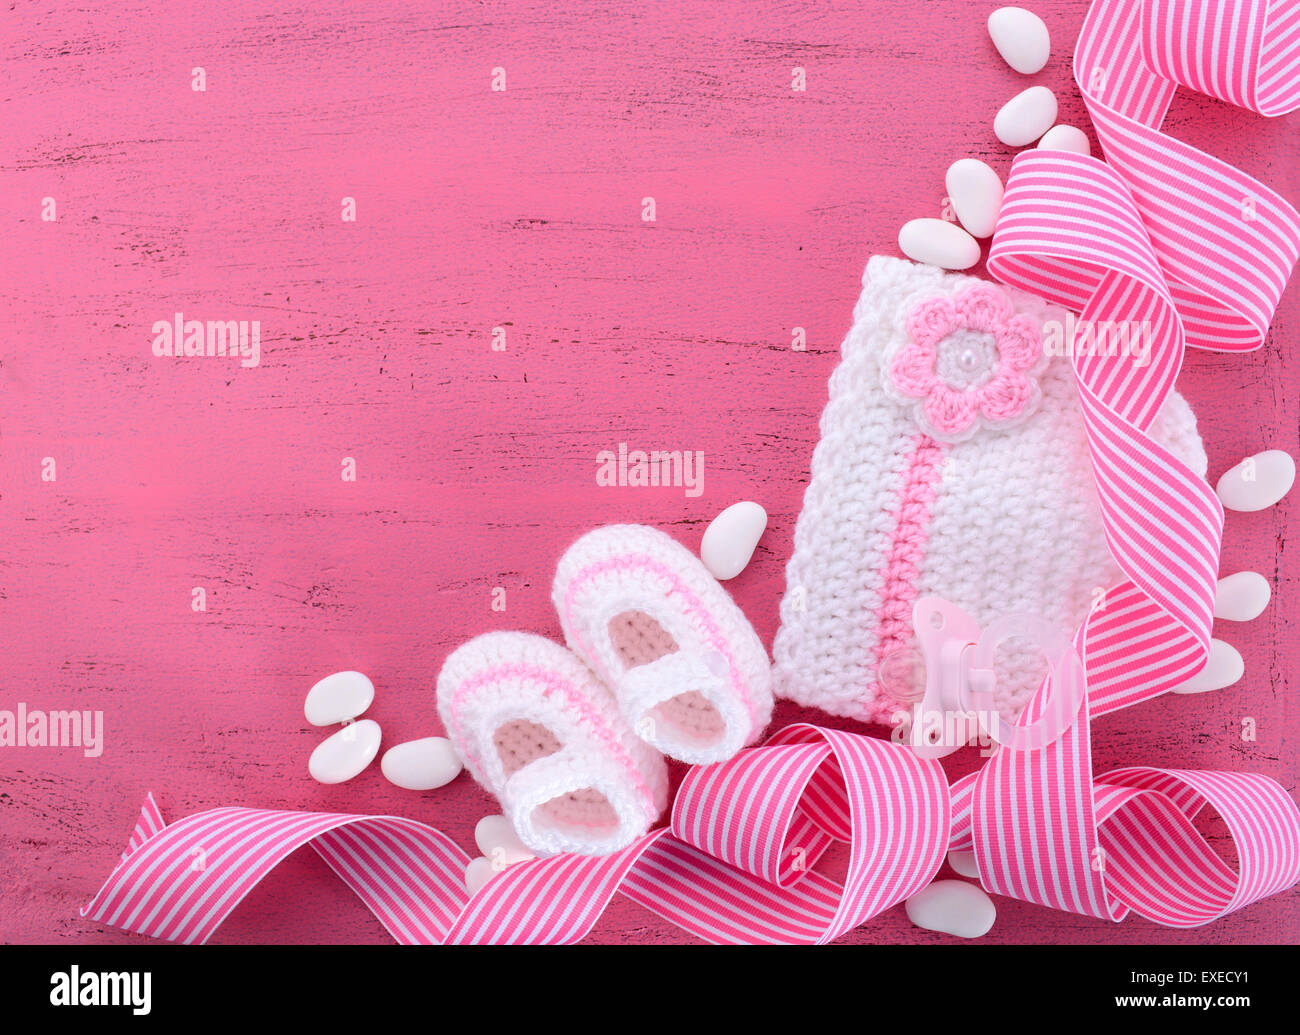 Its a Girl Baby Shower or Nursery background with baby clothes and accessories with copy space for your text here. Stock Photo